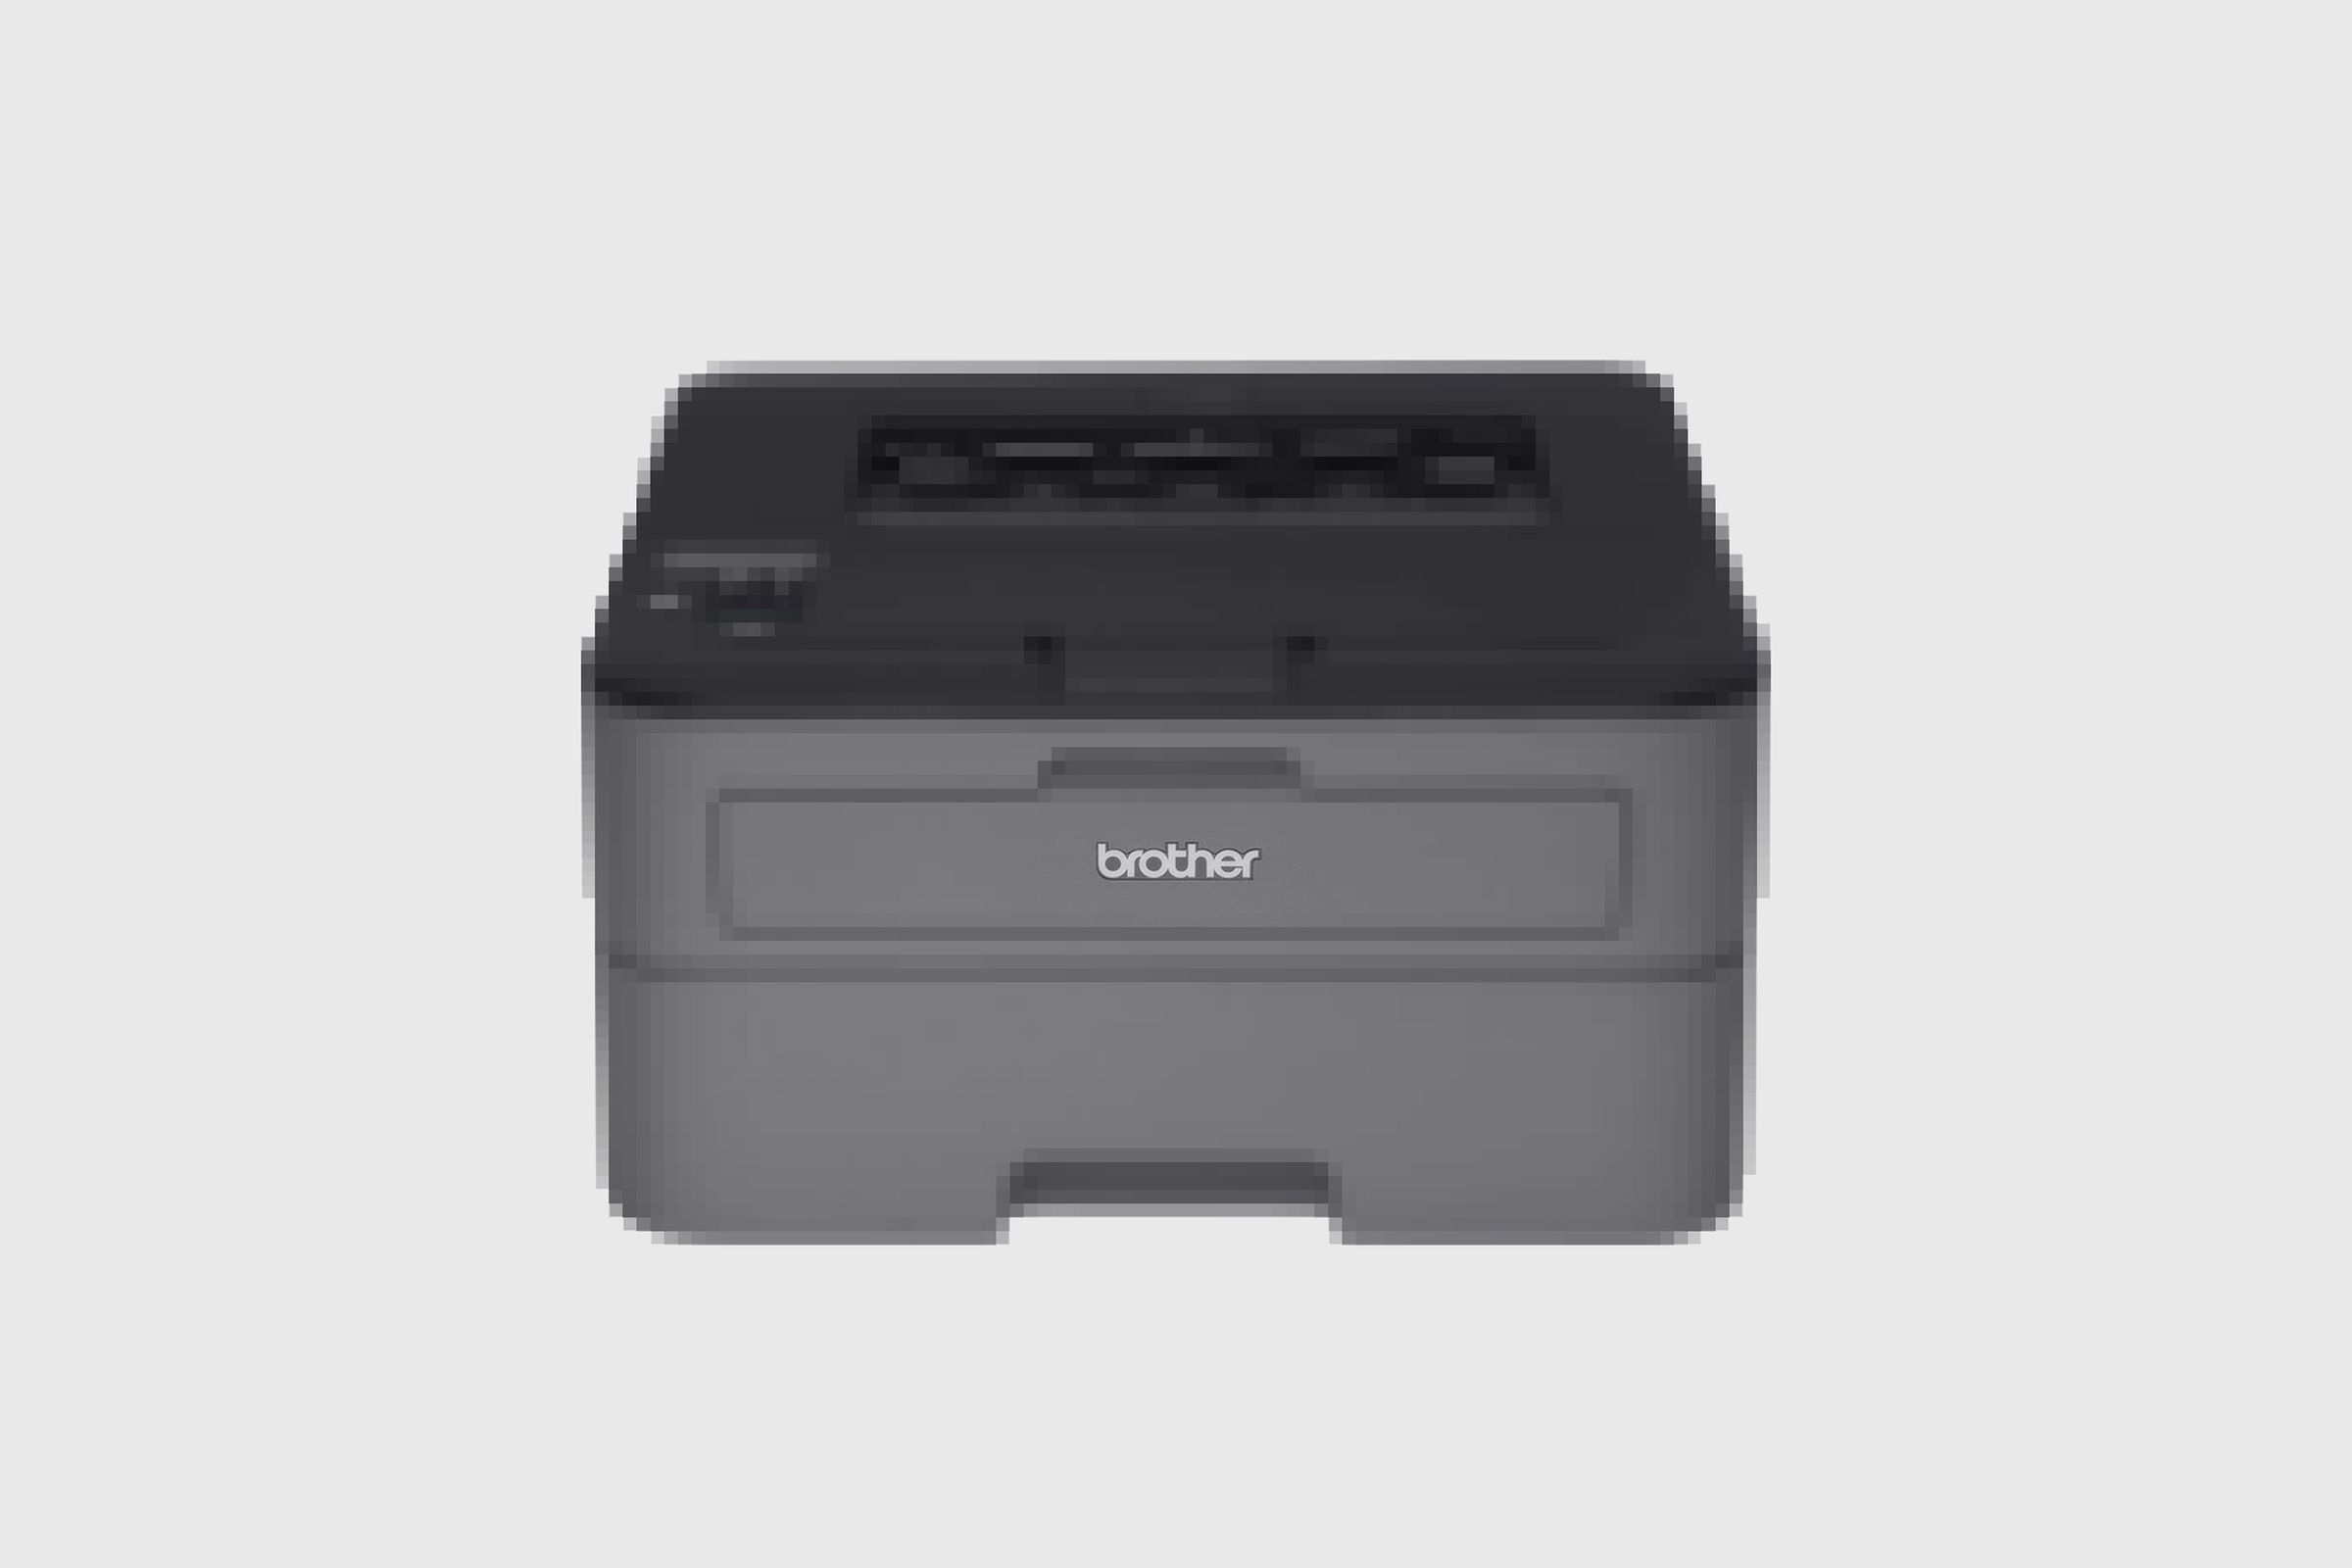 A blurry photo of a Brother laser printer.